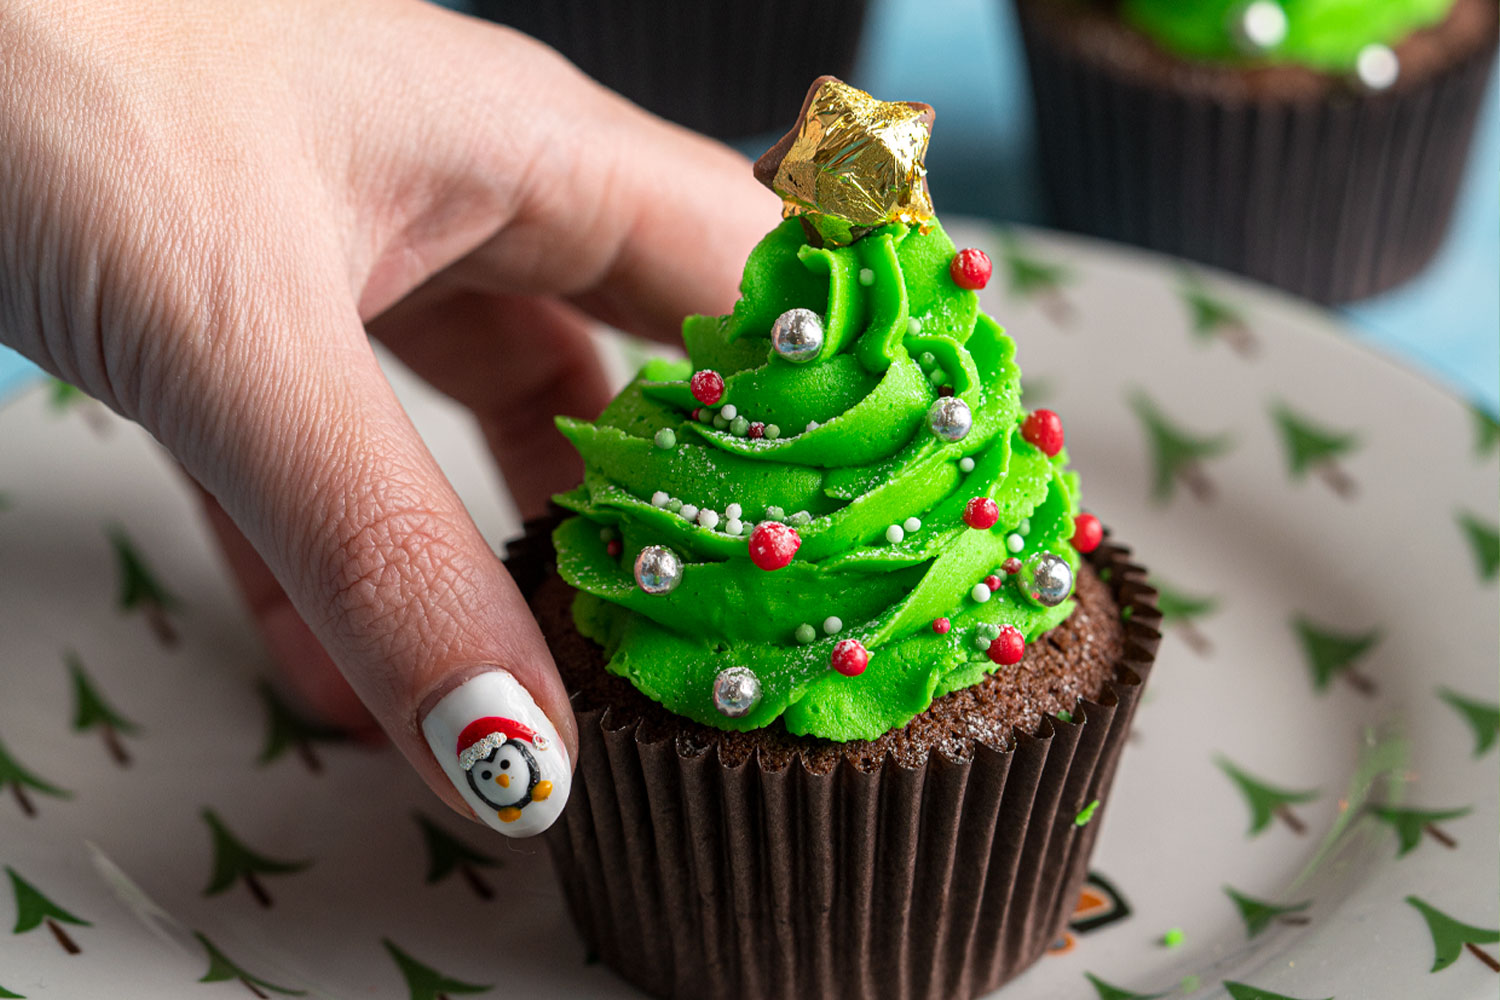 Fun Christmas Cupcakes and Cupcake Cake Ideas - The Keeper of the Cheerios